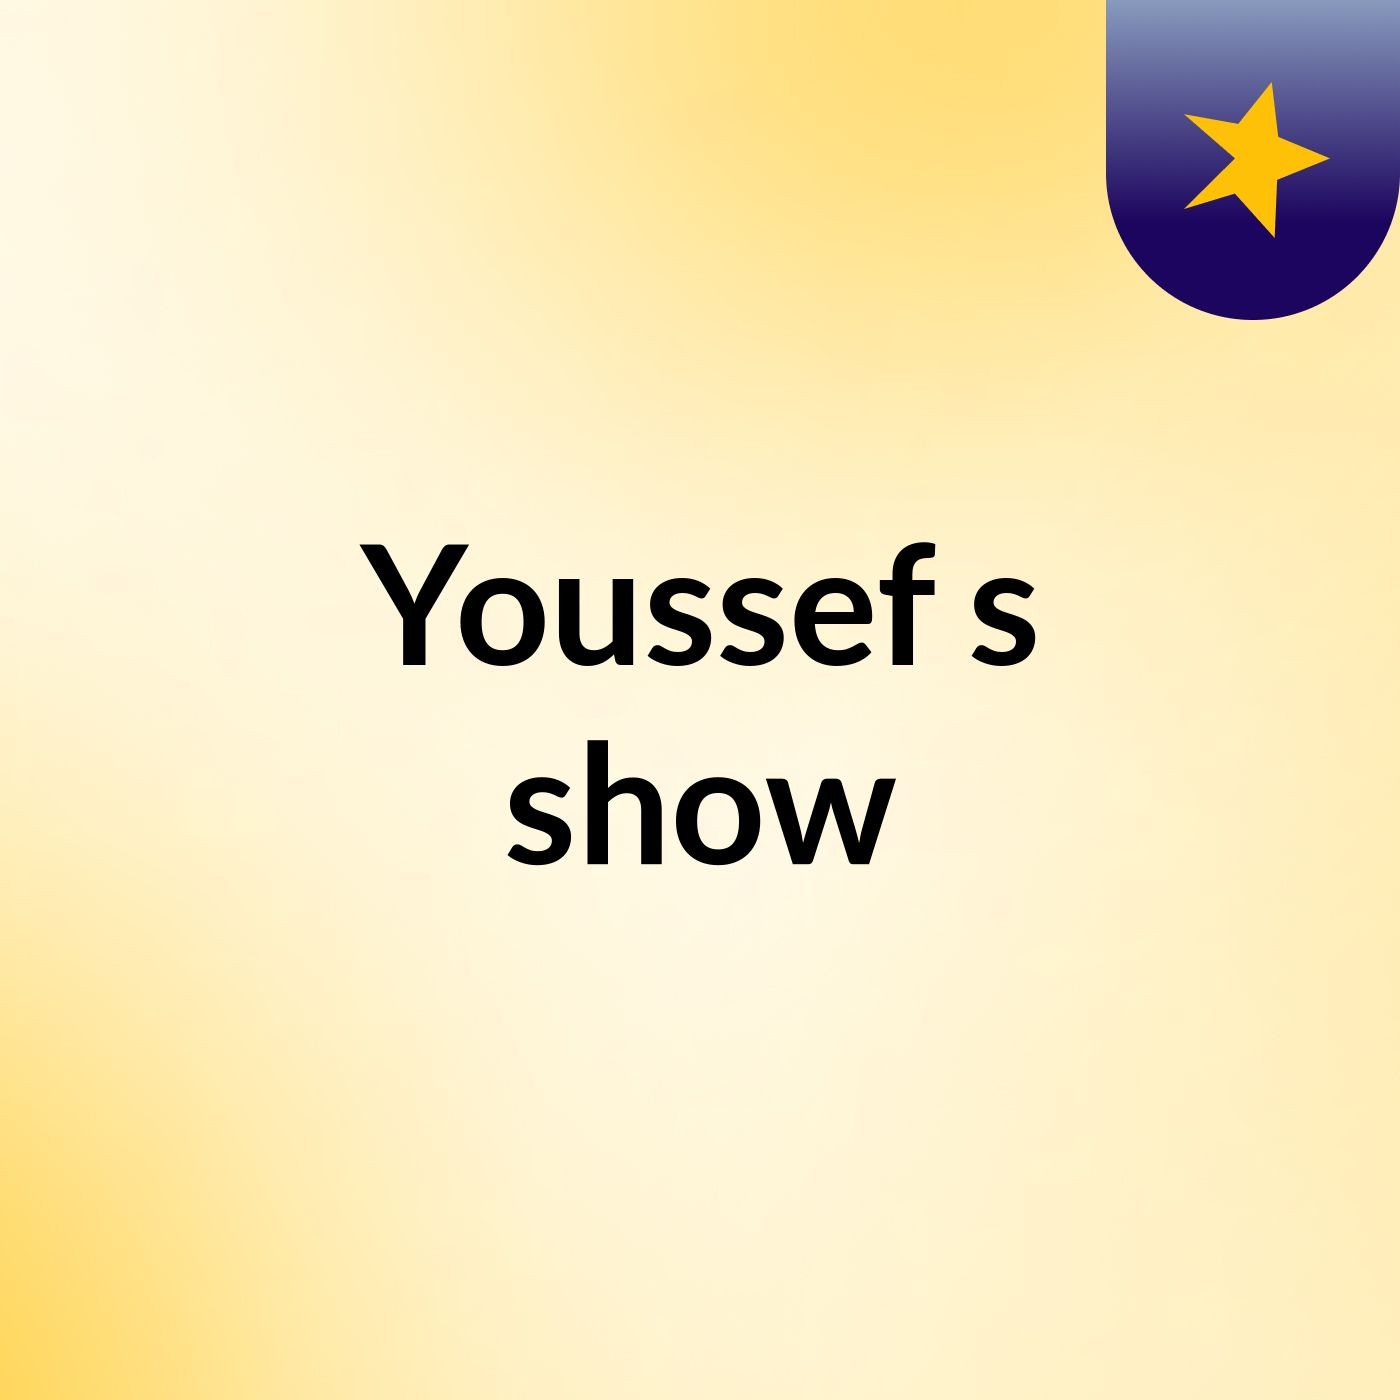 Youssef's show